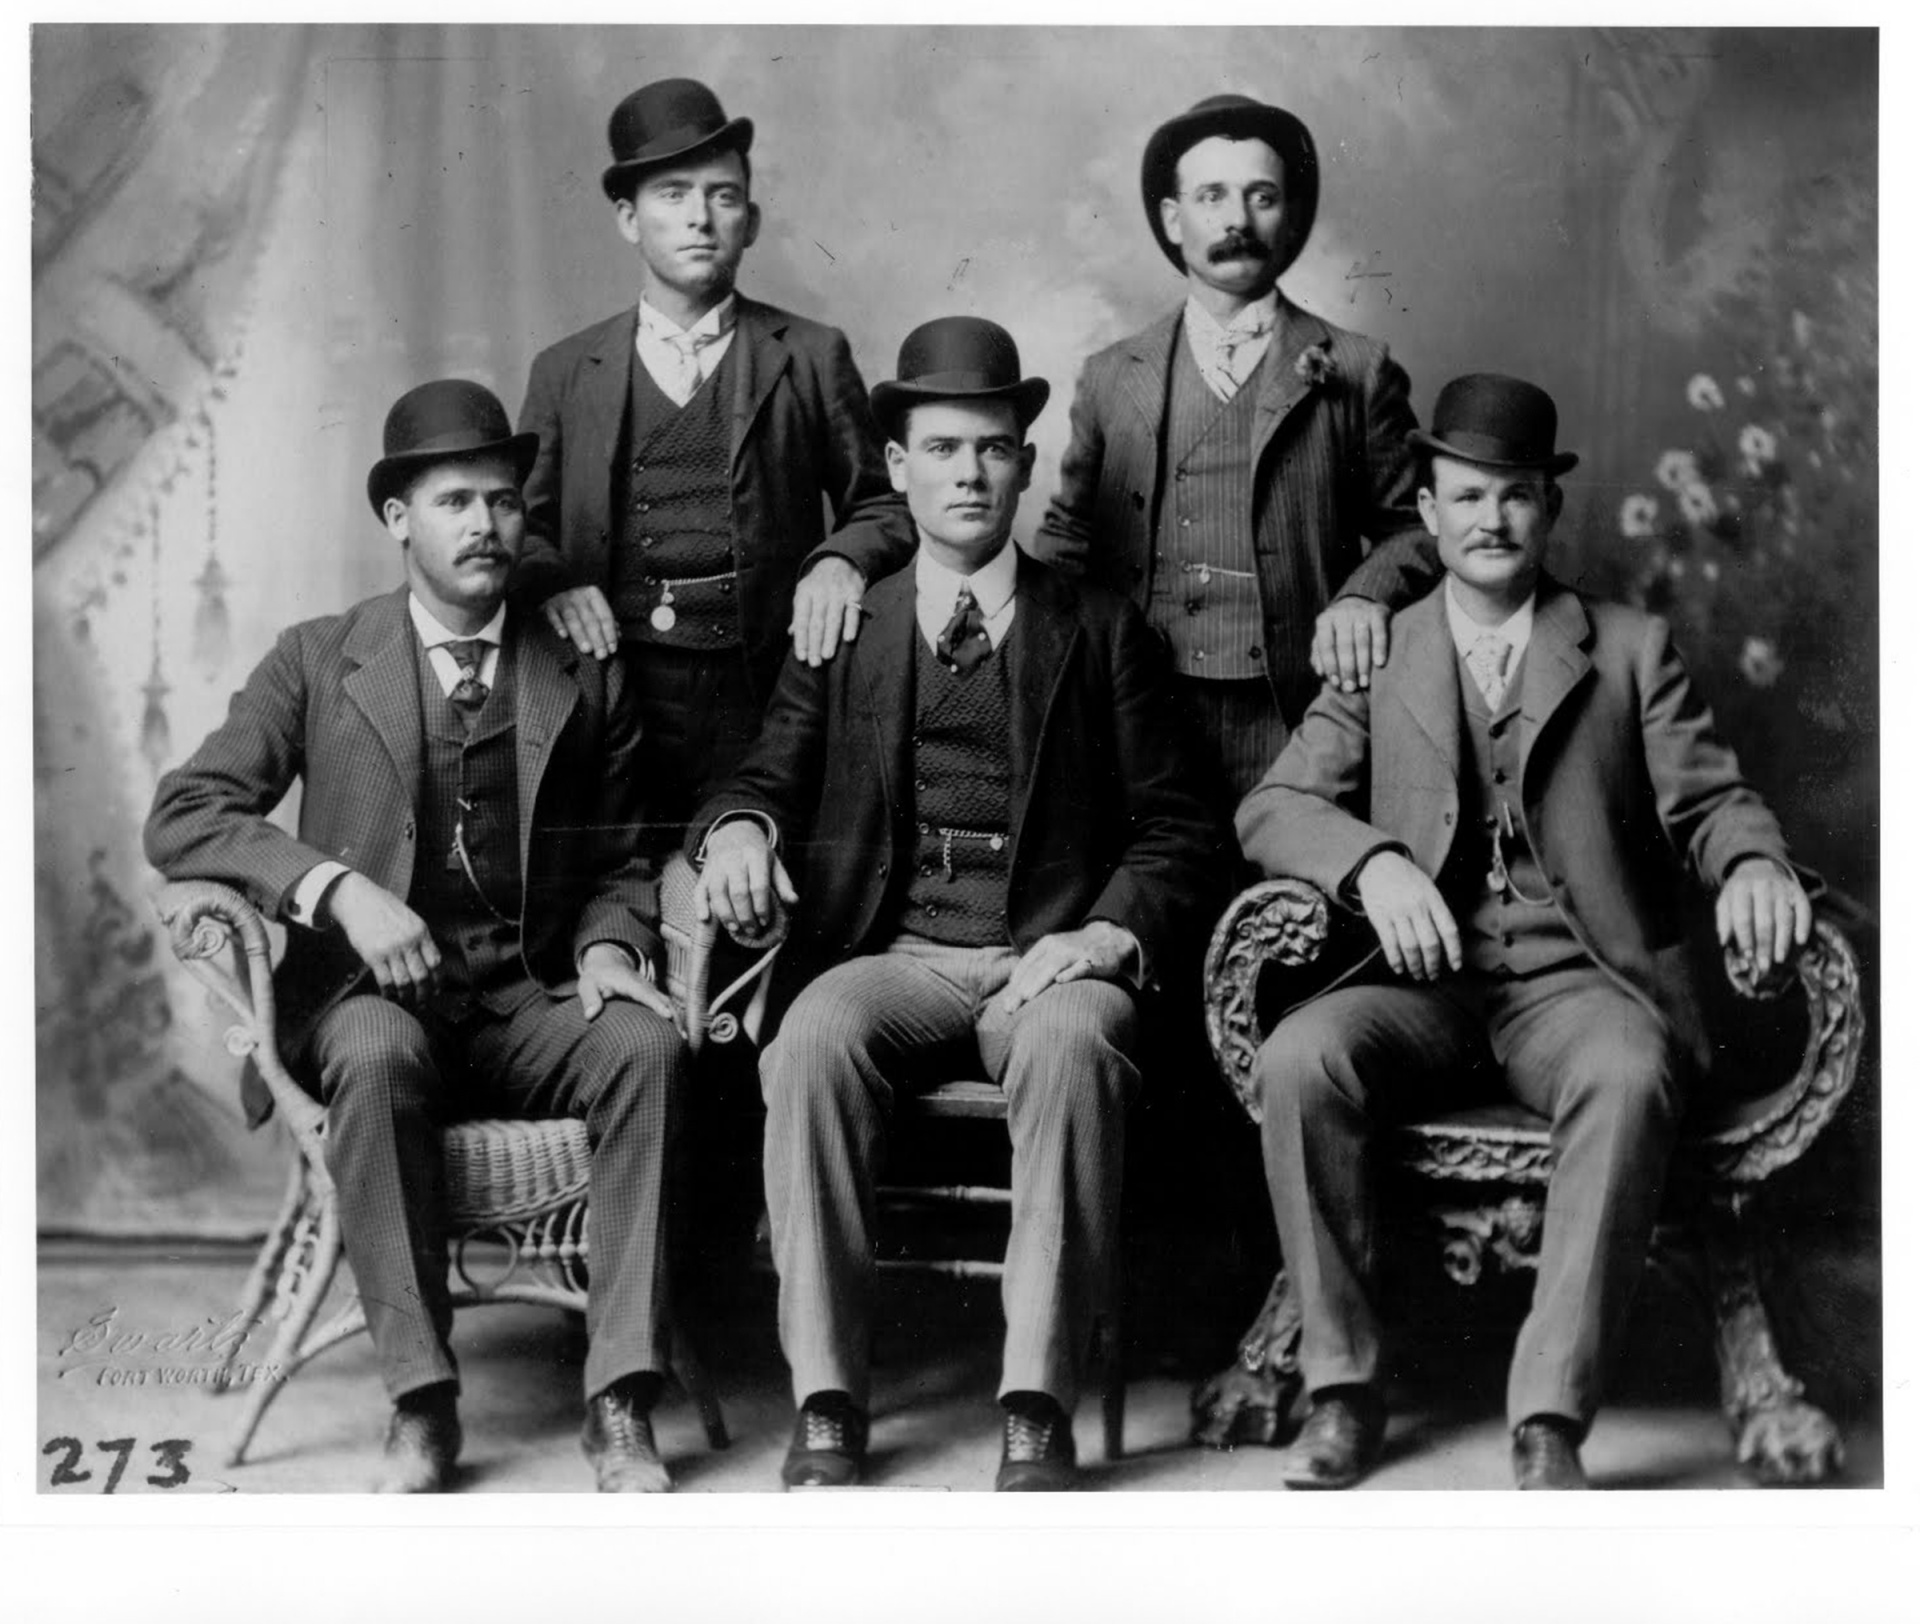 Vintage photo of the outlaw Butch Casssidy and and Wild Bunch